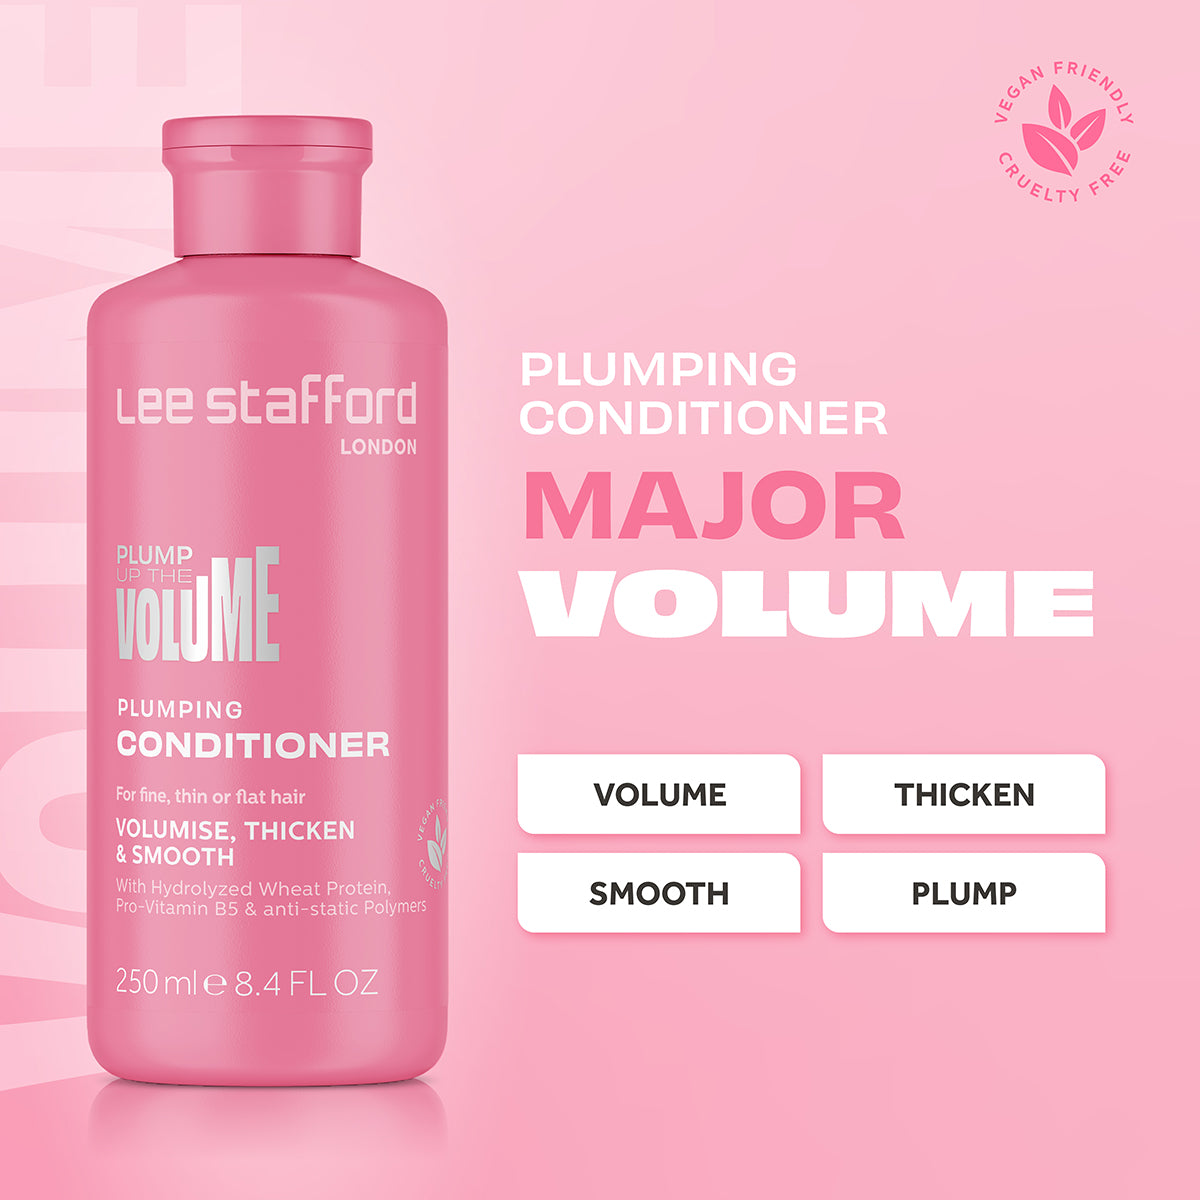 Plumping - LUCY MALTA Conditioner Stafford Lee MAKEUP STORE